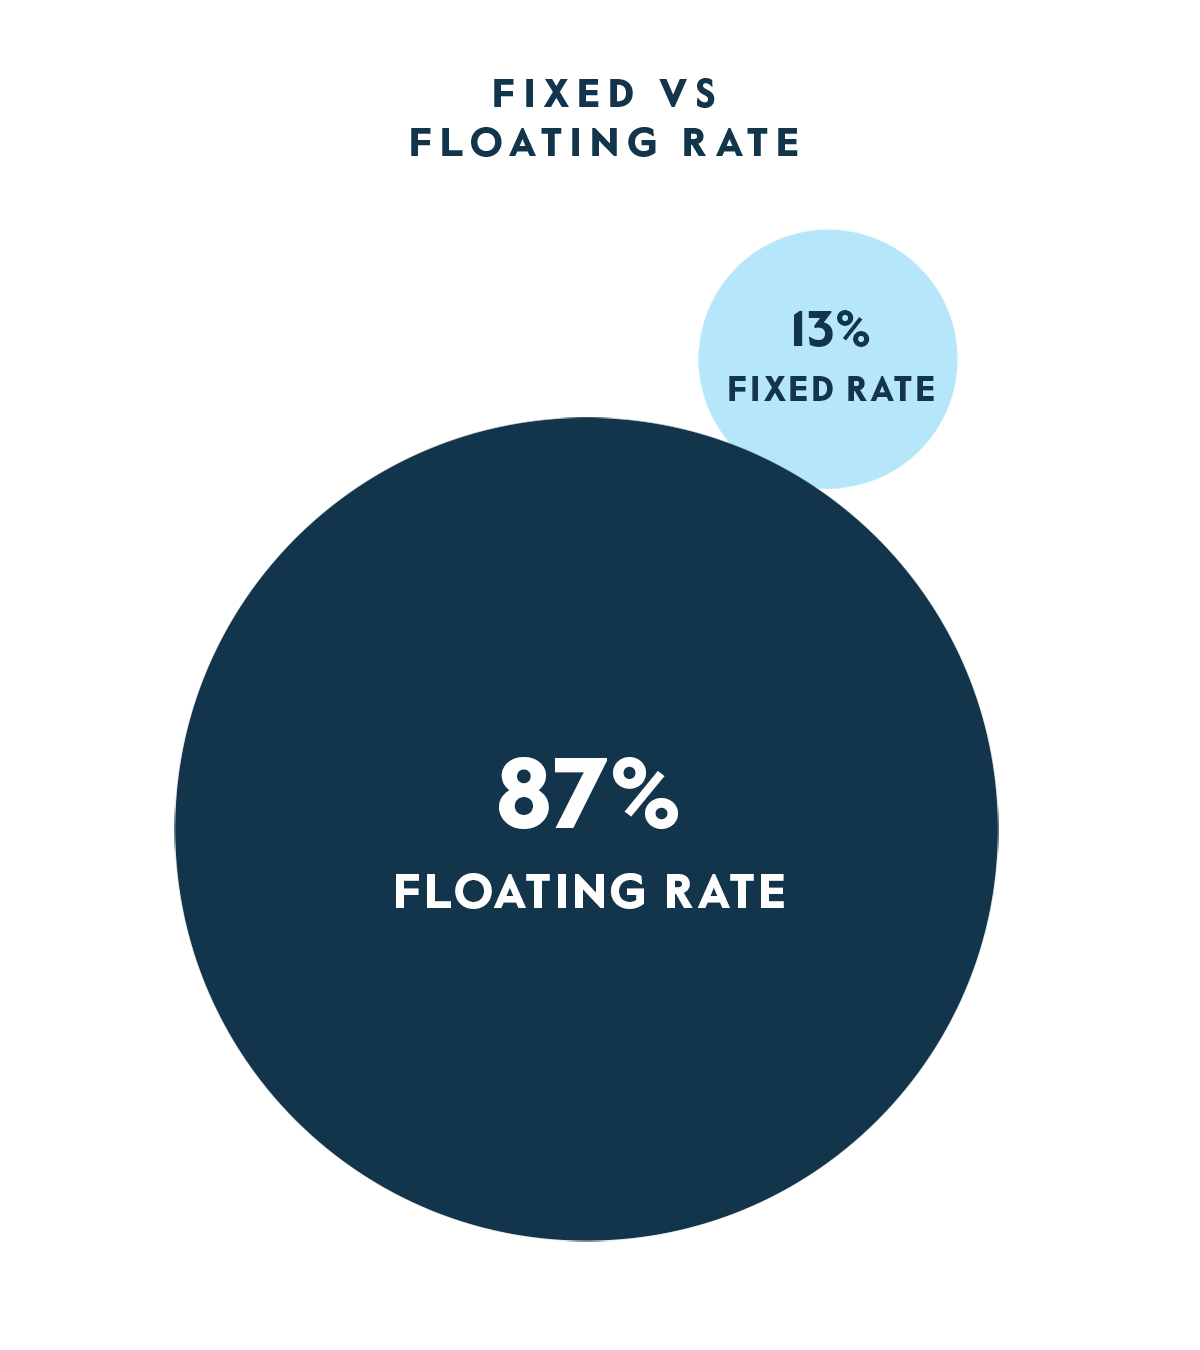 Fixed vs Floating Rate